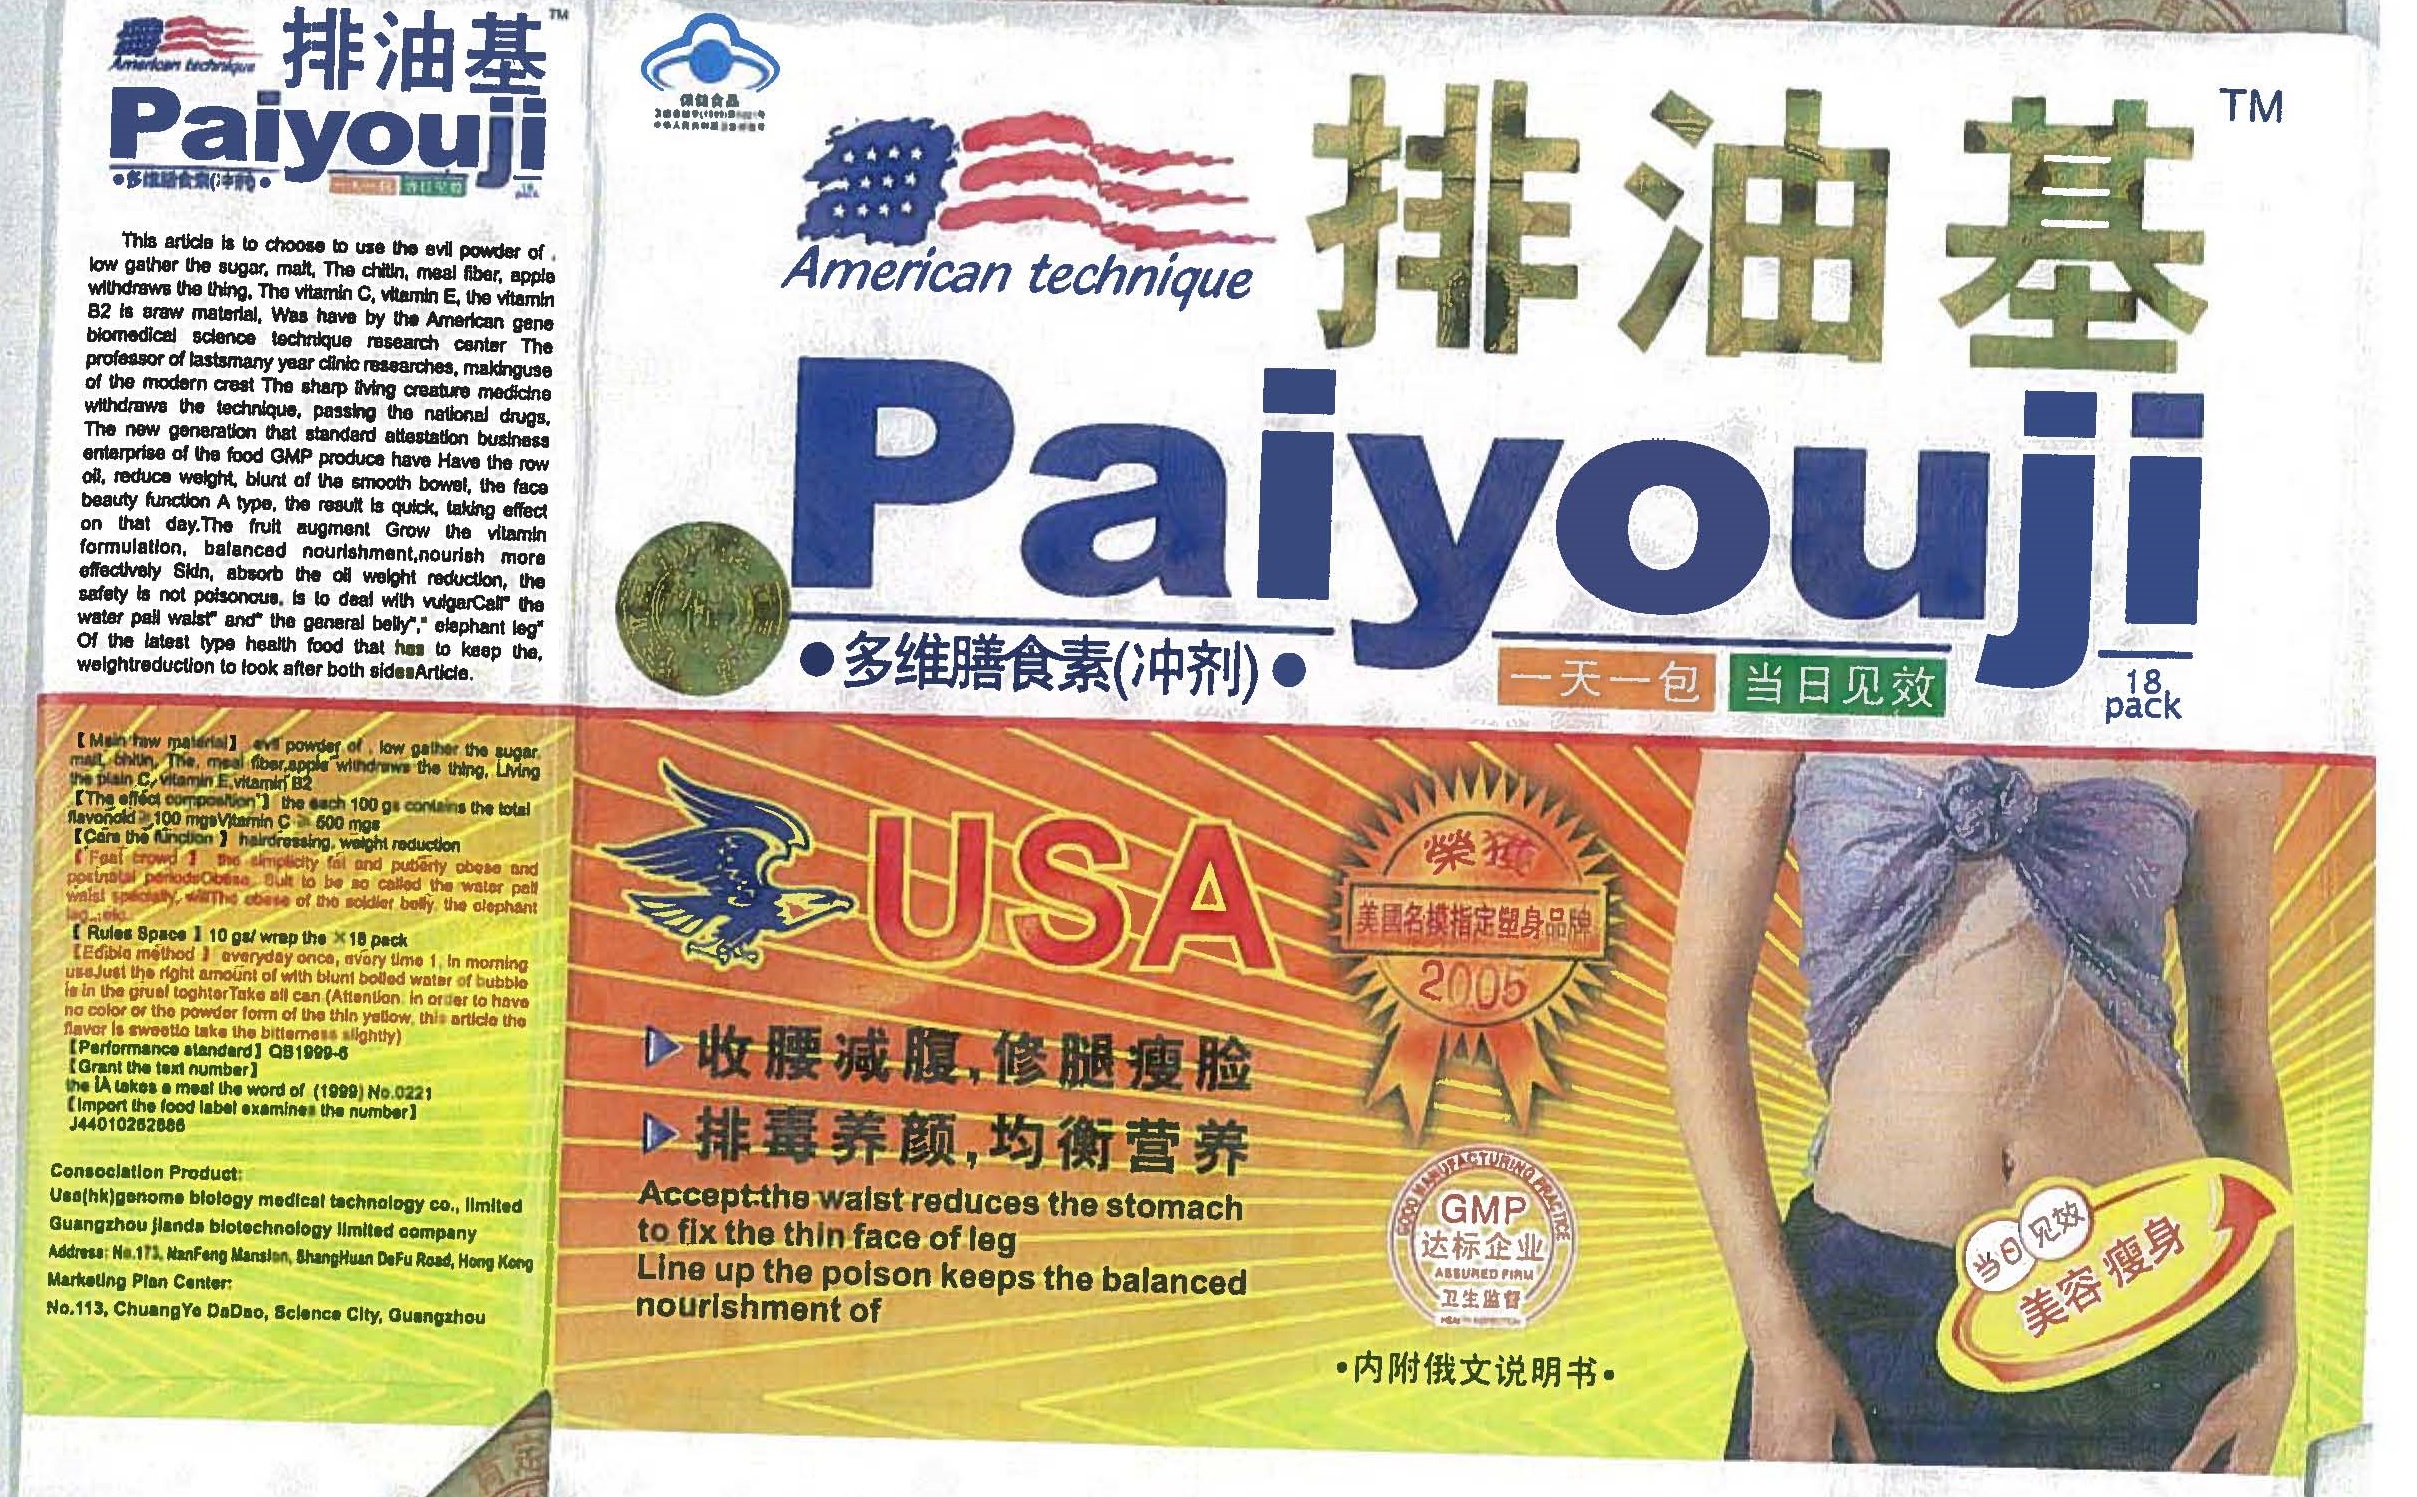 Image of the illigal product: American Technique Paiyouji USA